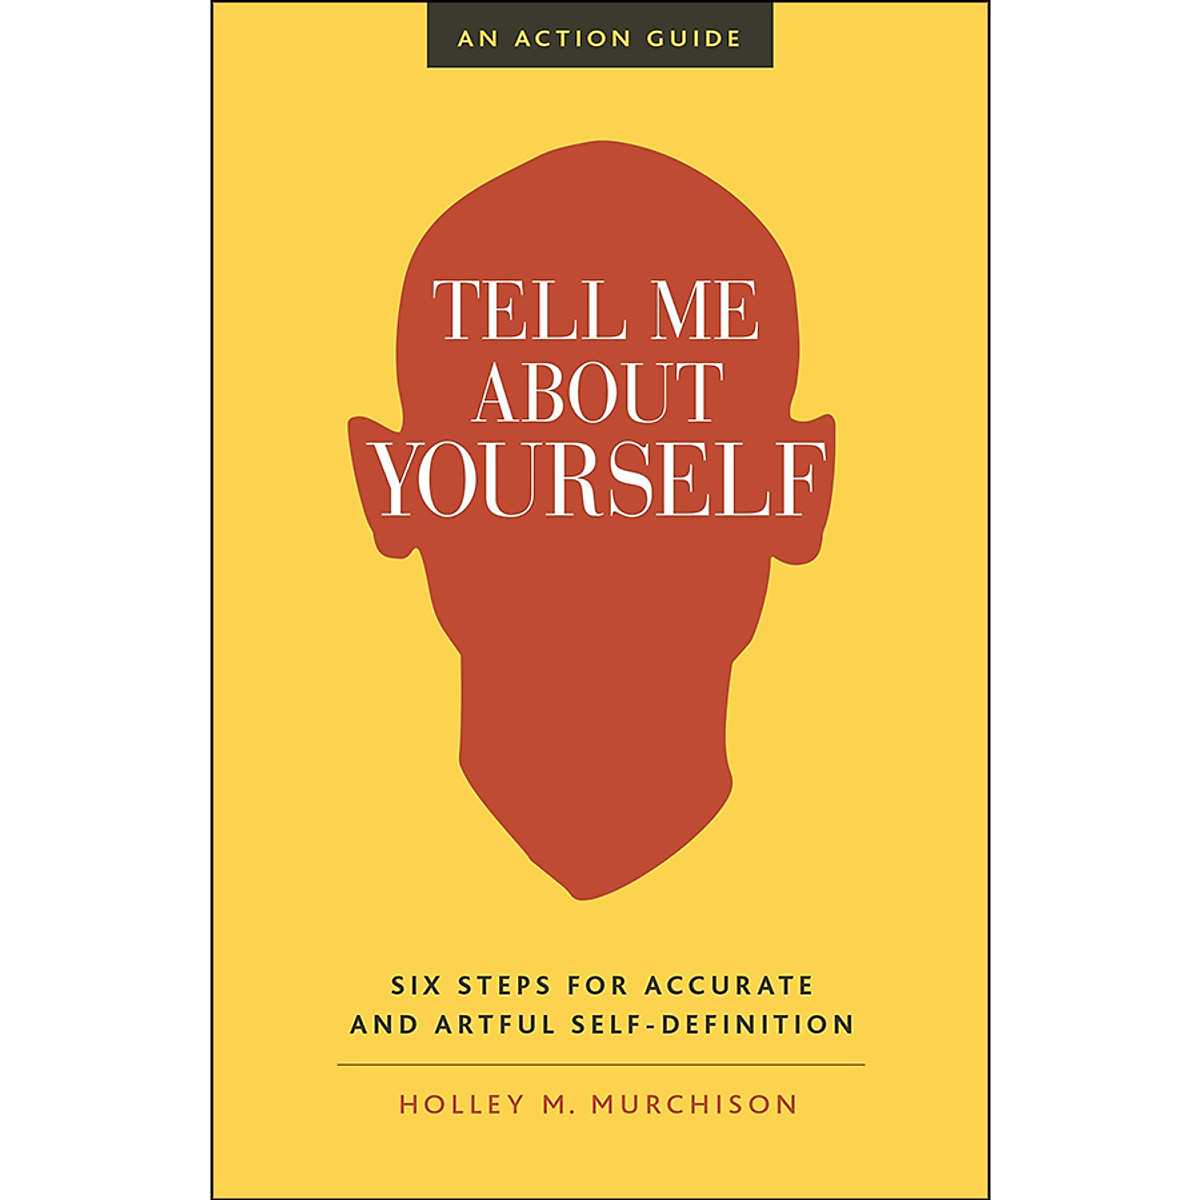 [Hàng thanh lý miễn đổi trả] Tell Me About Yourself : Six Steps for Accurate and Artful Self-Definition (An Action Guide)